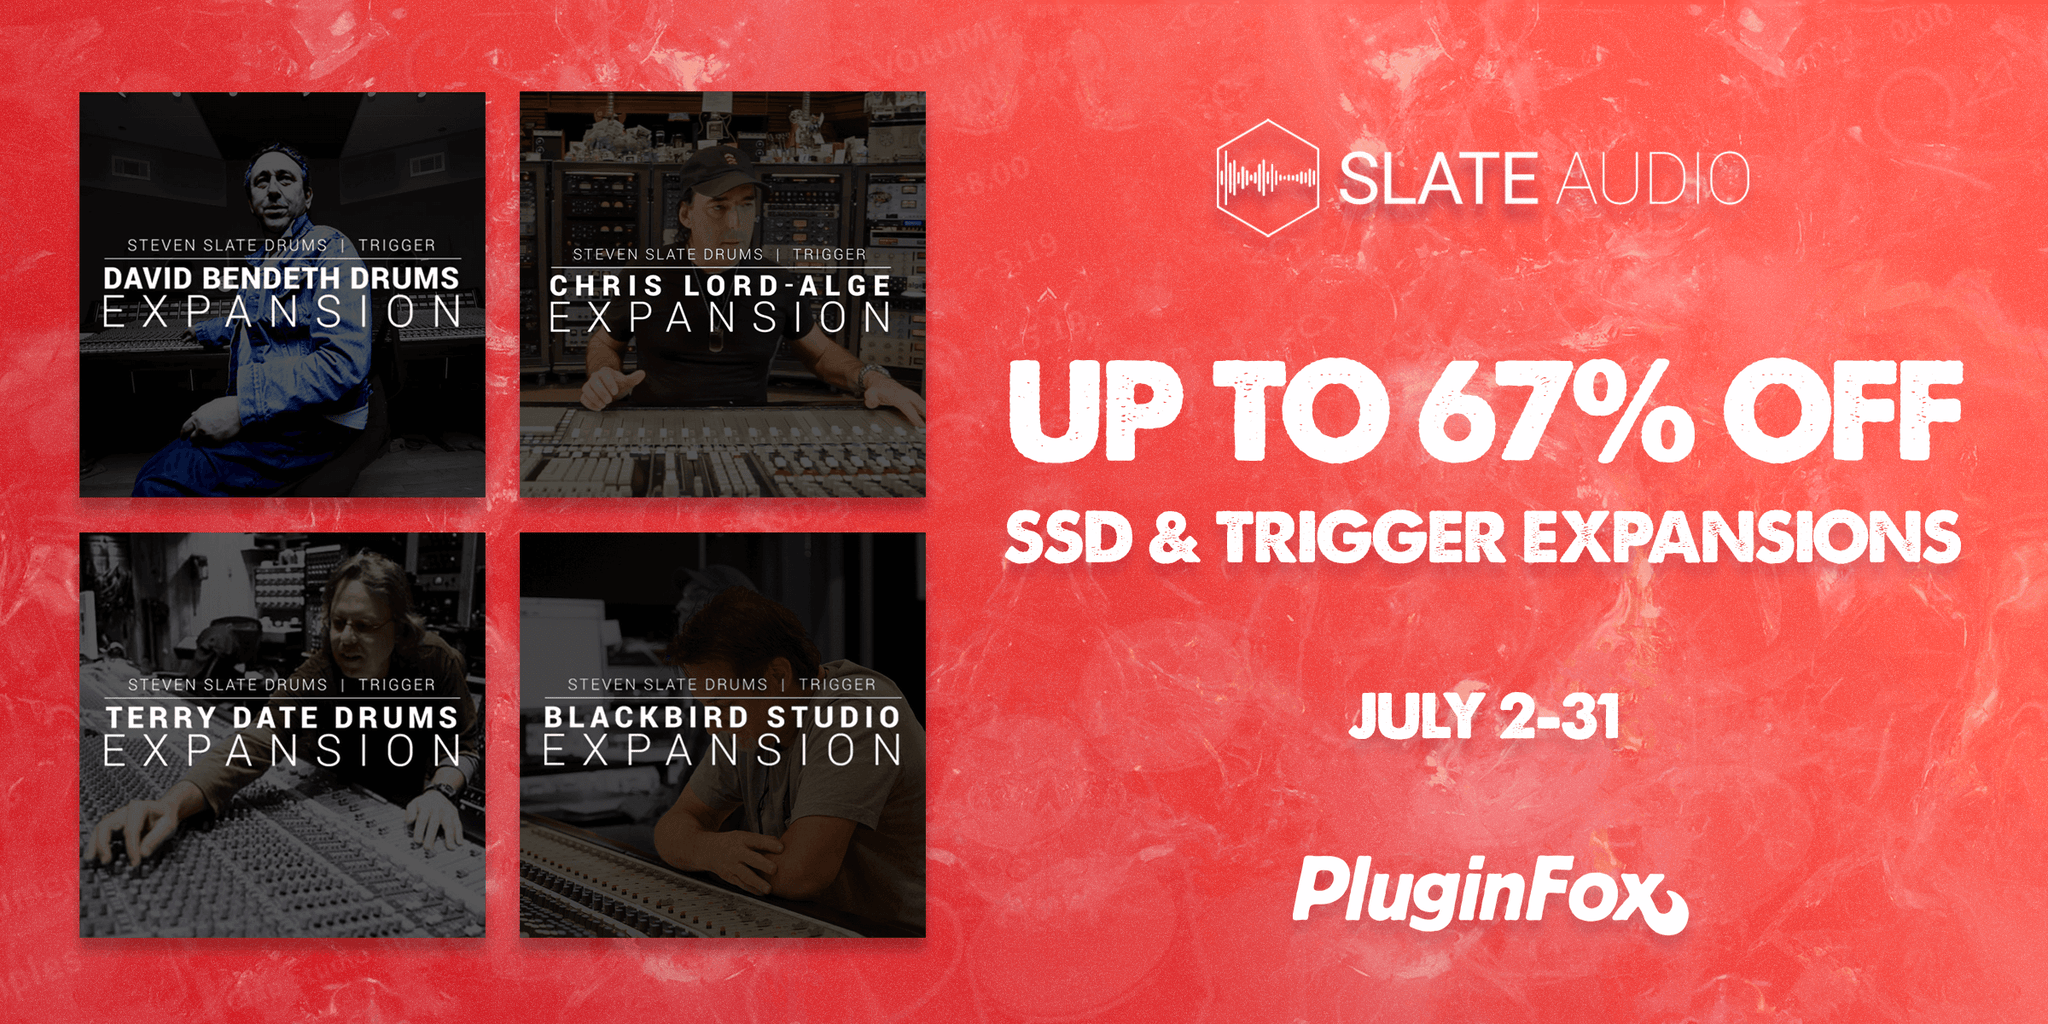 Slate Audio Expansions Sale - July 2-31